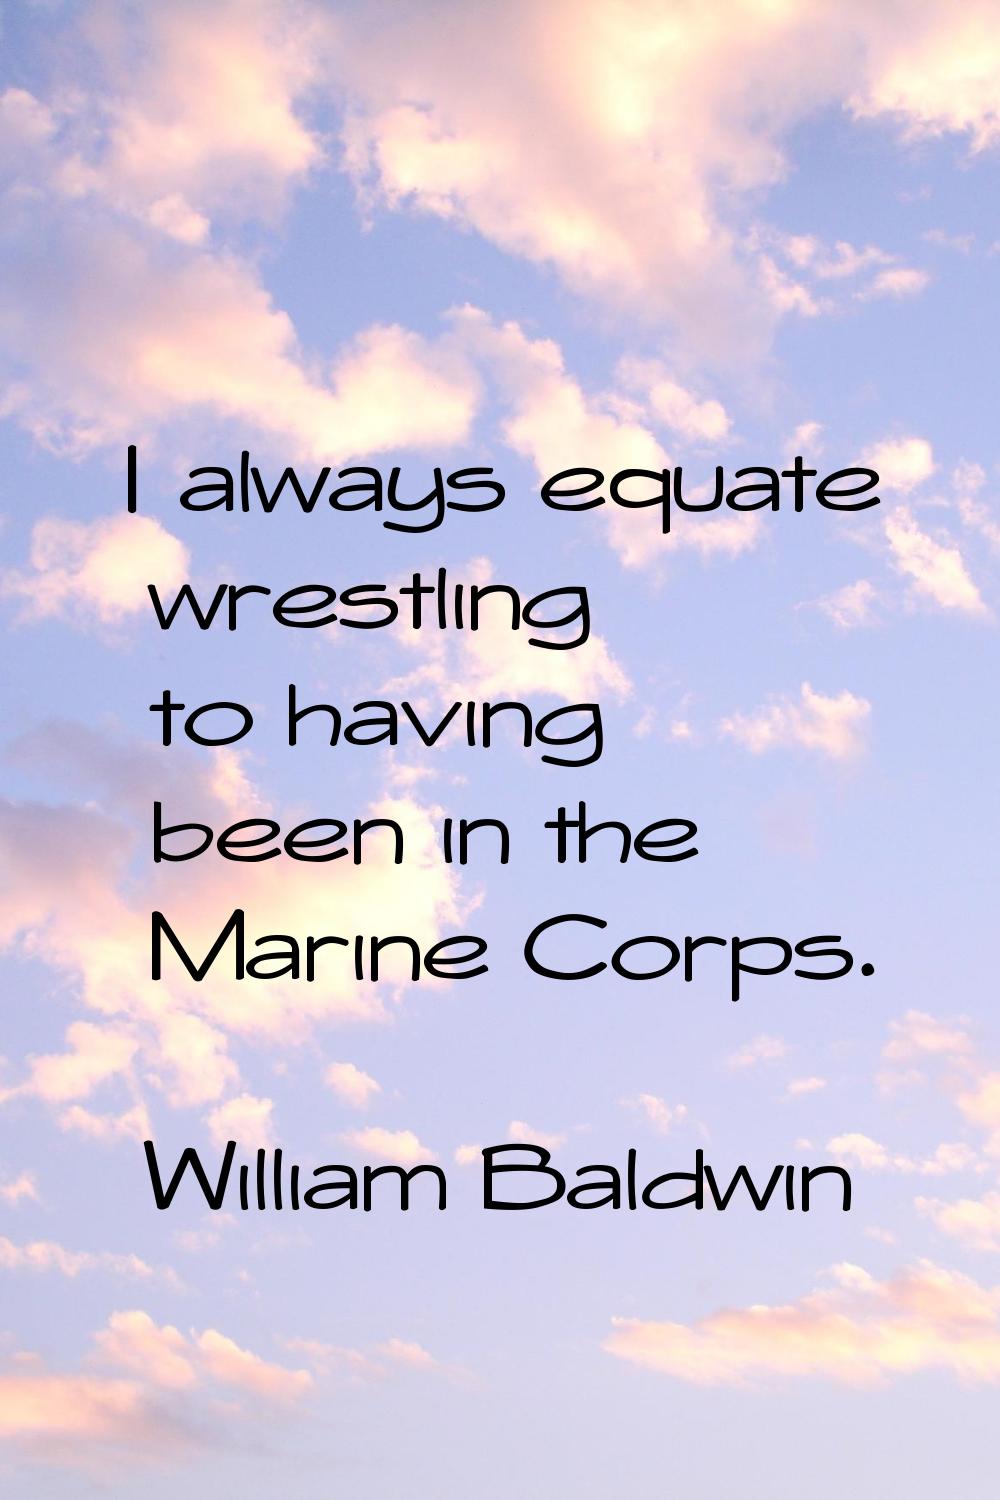 I always equate wrestling to having been in the Marine Corps.